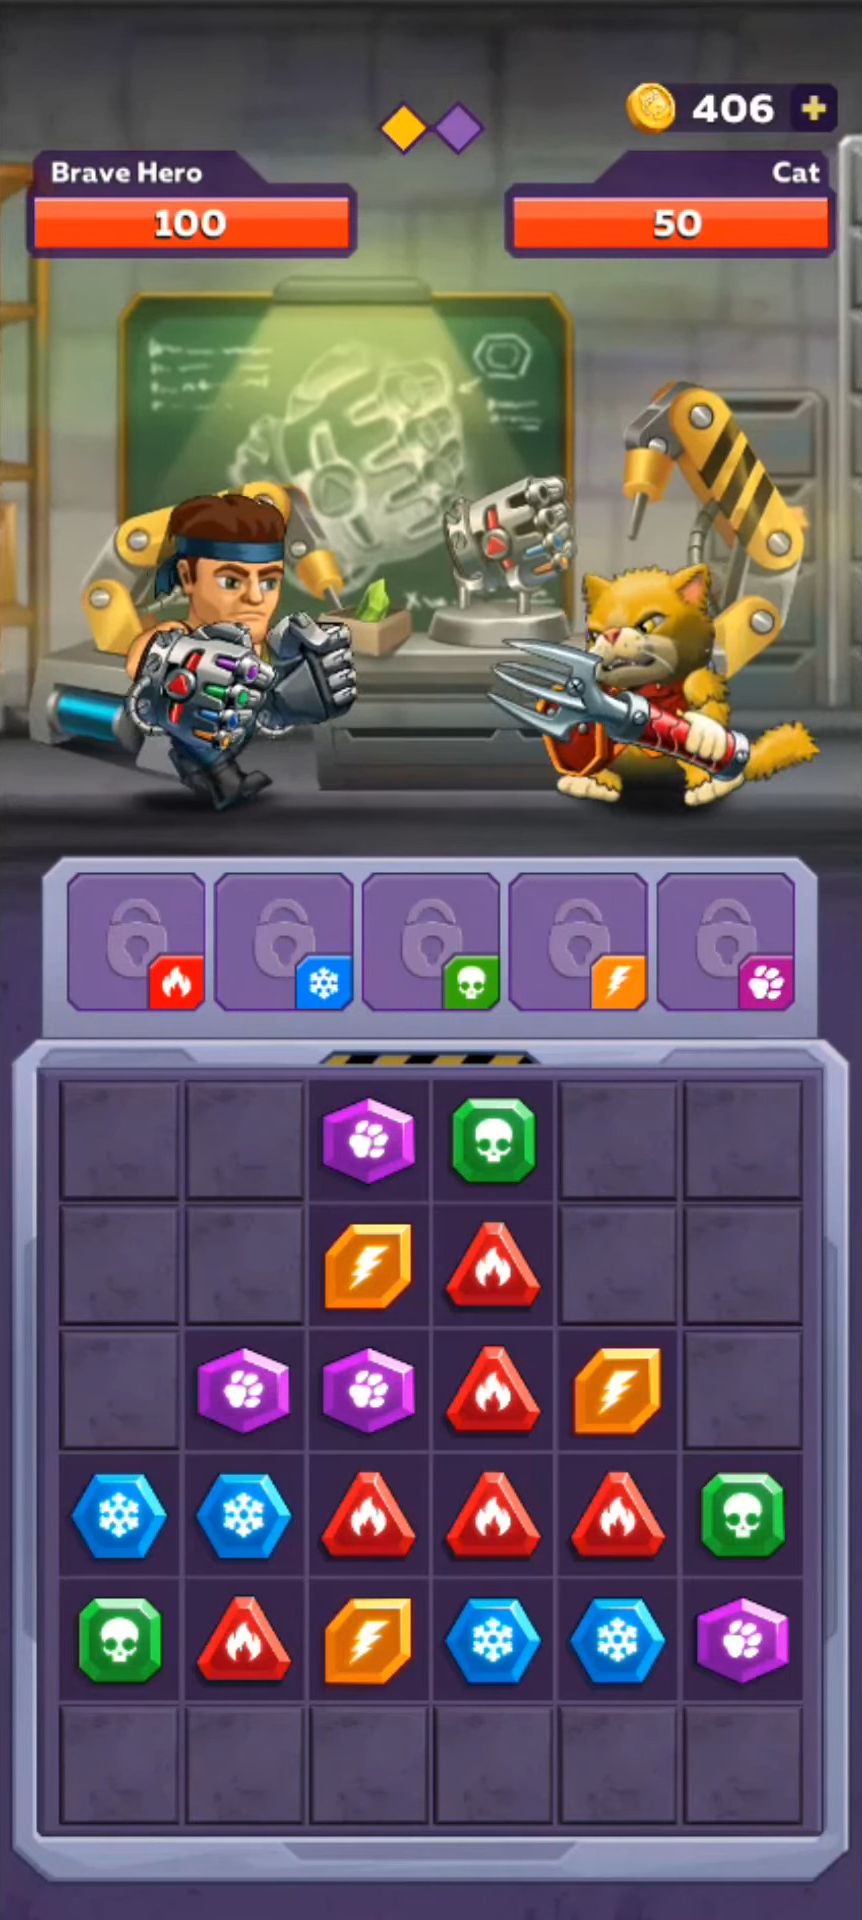 Scarica Battle Lines: Puzzle Fighter gratis per Android.